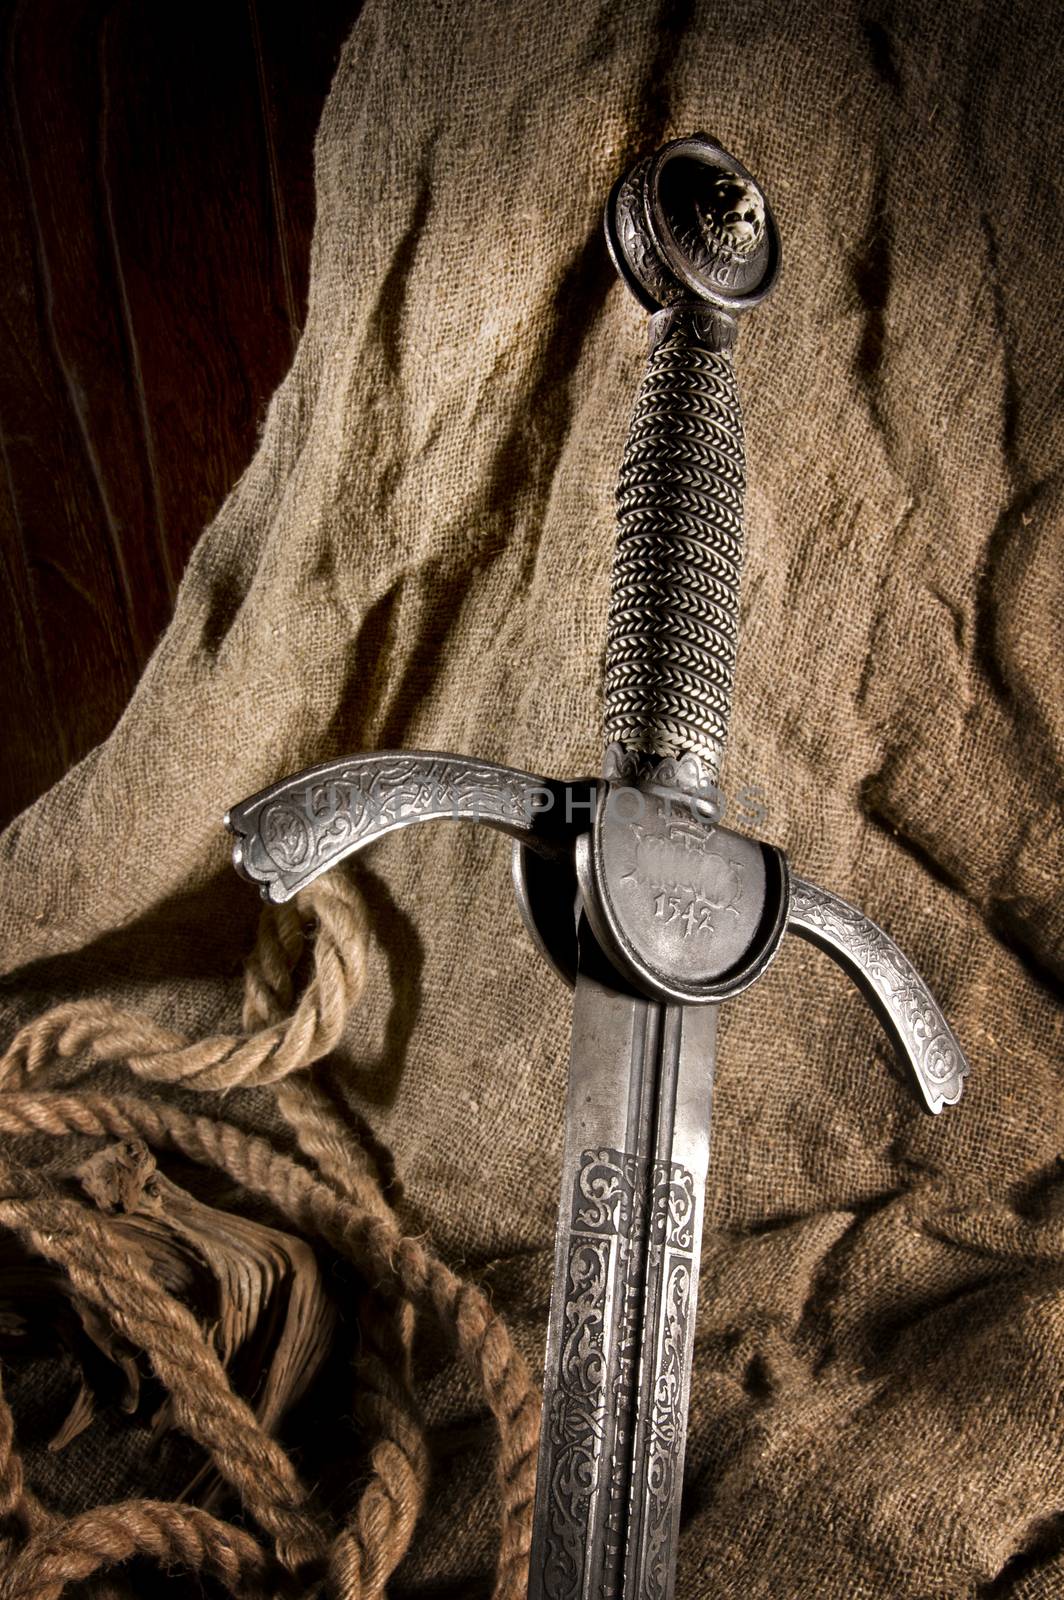 smart sword of the knight of the middle ages by sibrikov